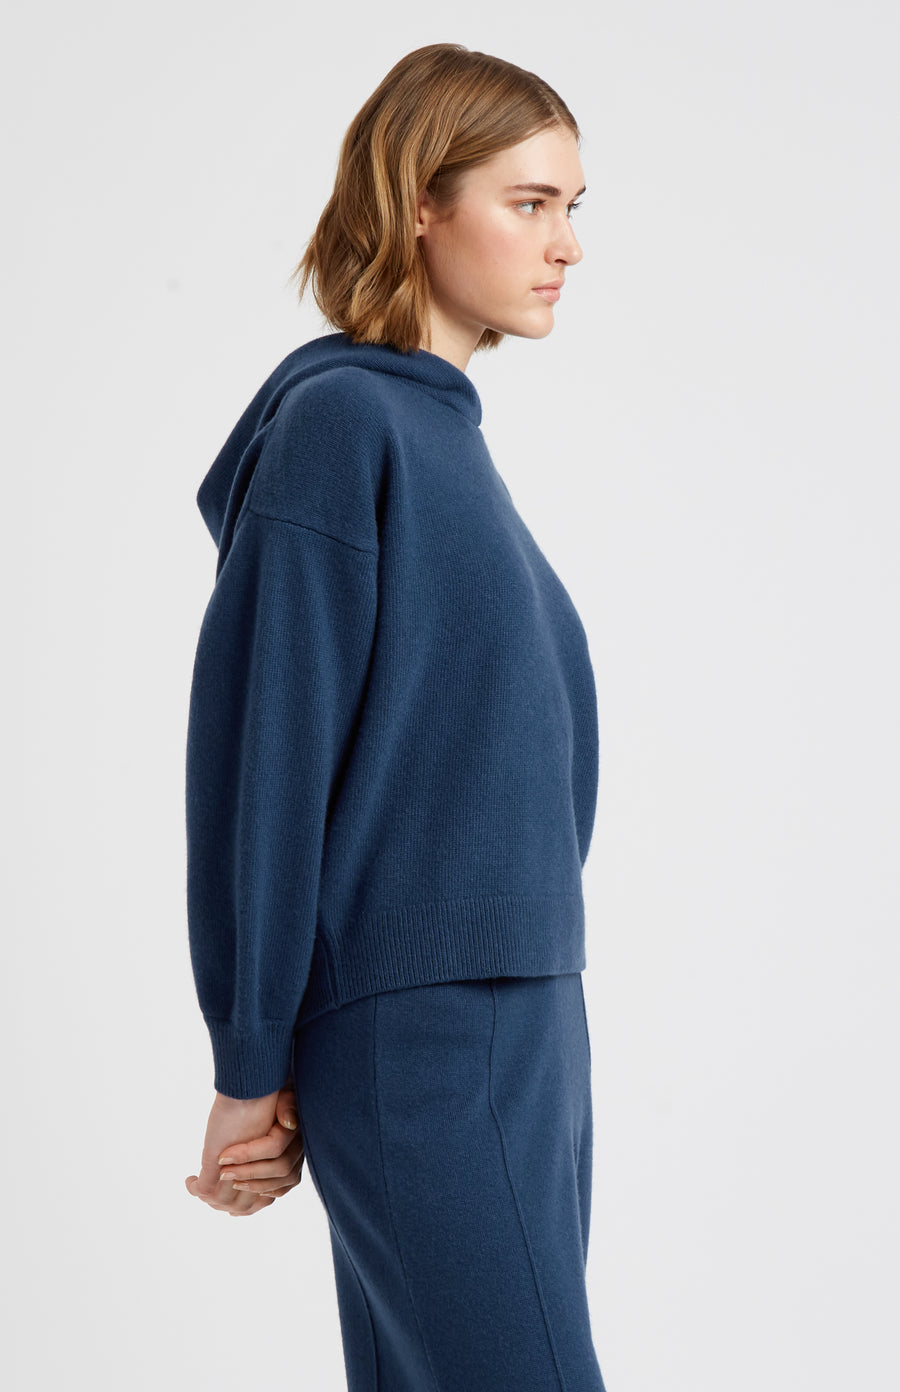 Pringle of Scotland Women's Cashmere Blend Hoodie In Night Sky side view